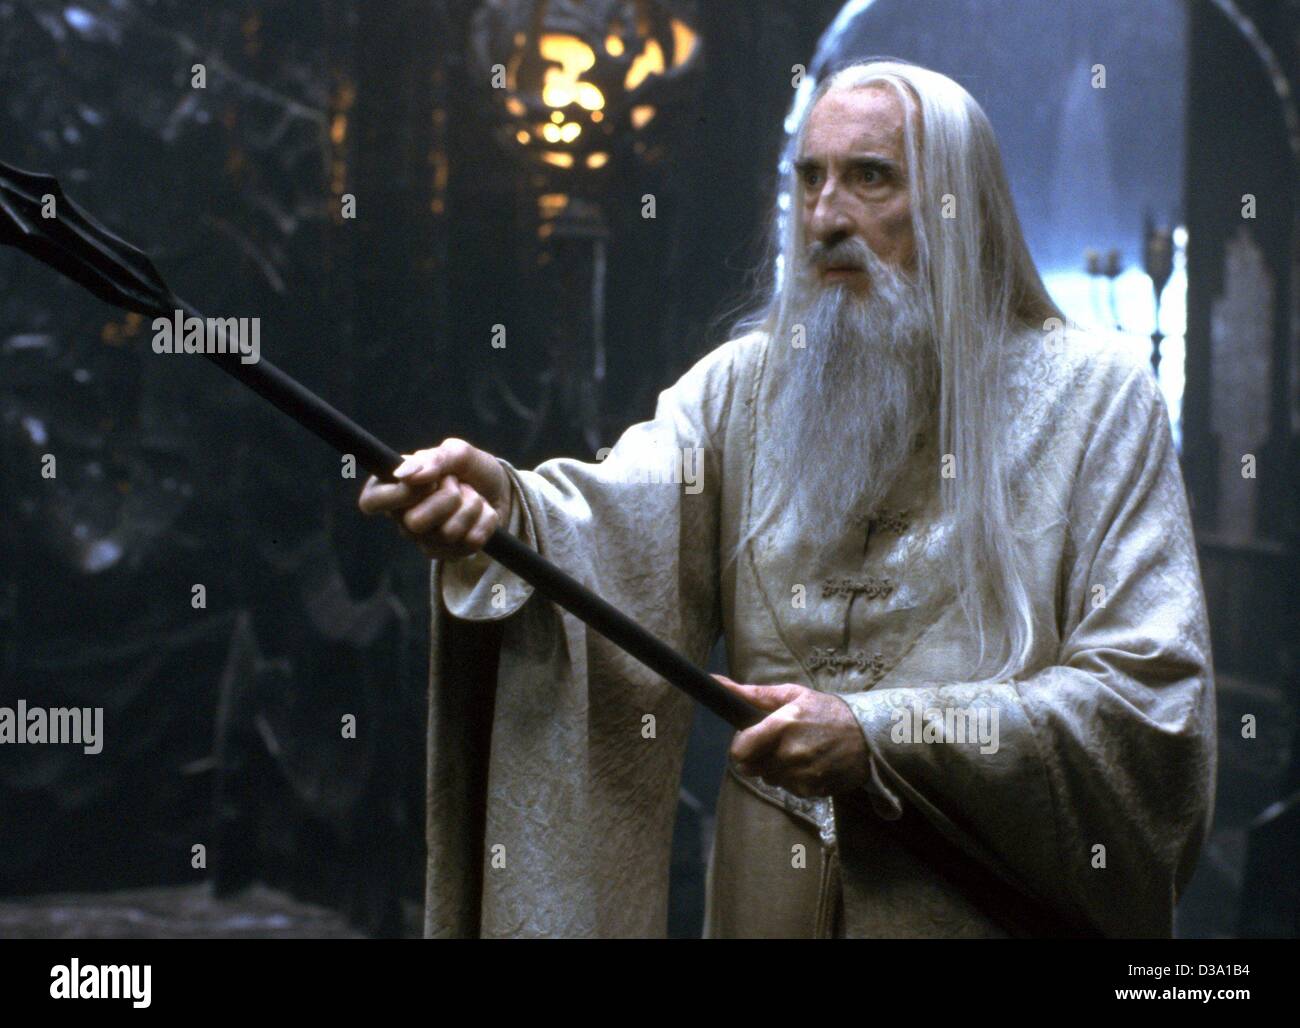 In Lord Of The Rings, was Saruman already forming his army before Gandalf  arrived at Isengard or did he build one in just a few days and weeks as  shown in the